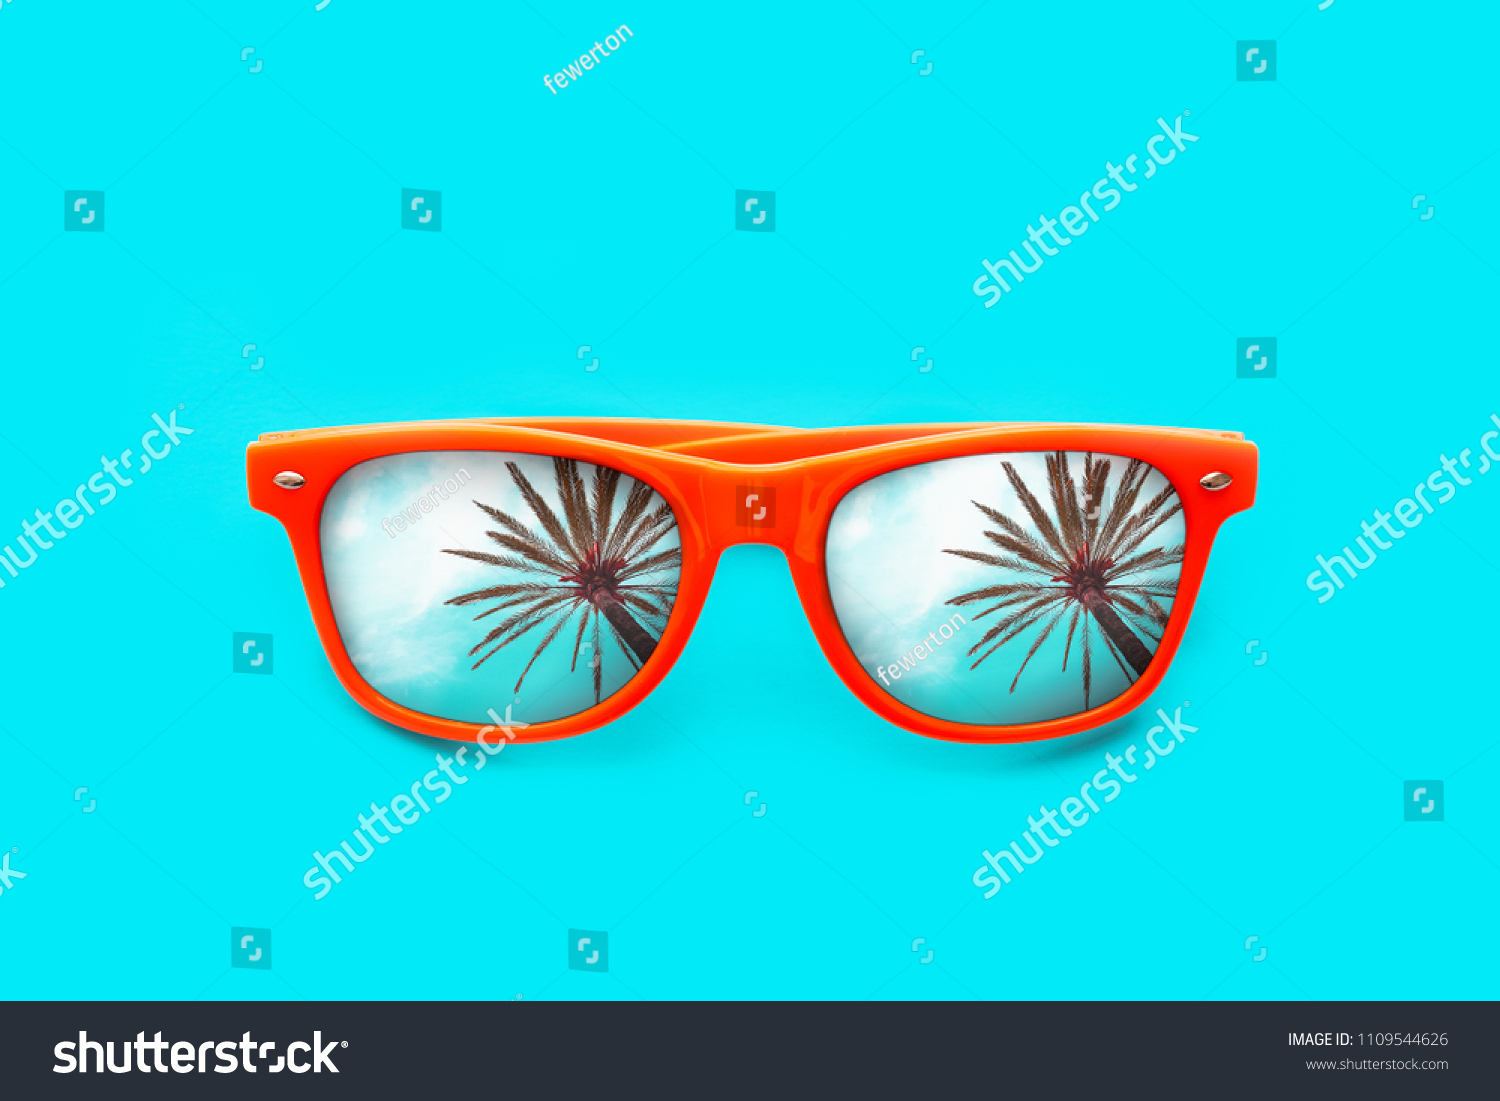 Orange sunglasses with palm tree reflections isolated in intense cyan blue background. Minimal image concept for ready for summer, sun protection, hot days and tropical travel vacation. #1109544626